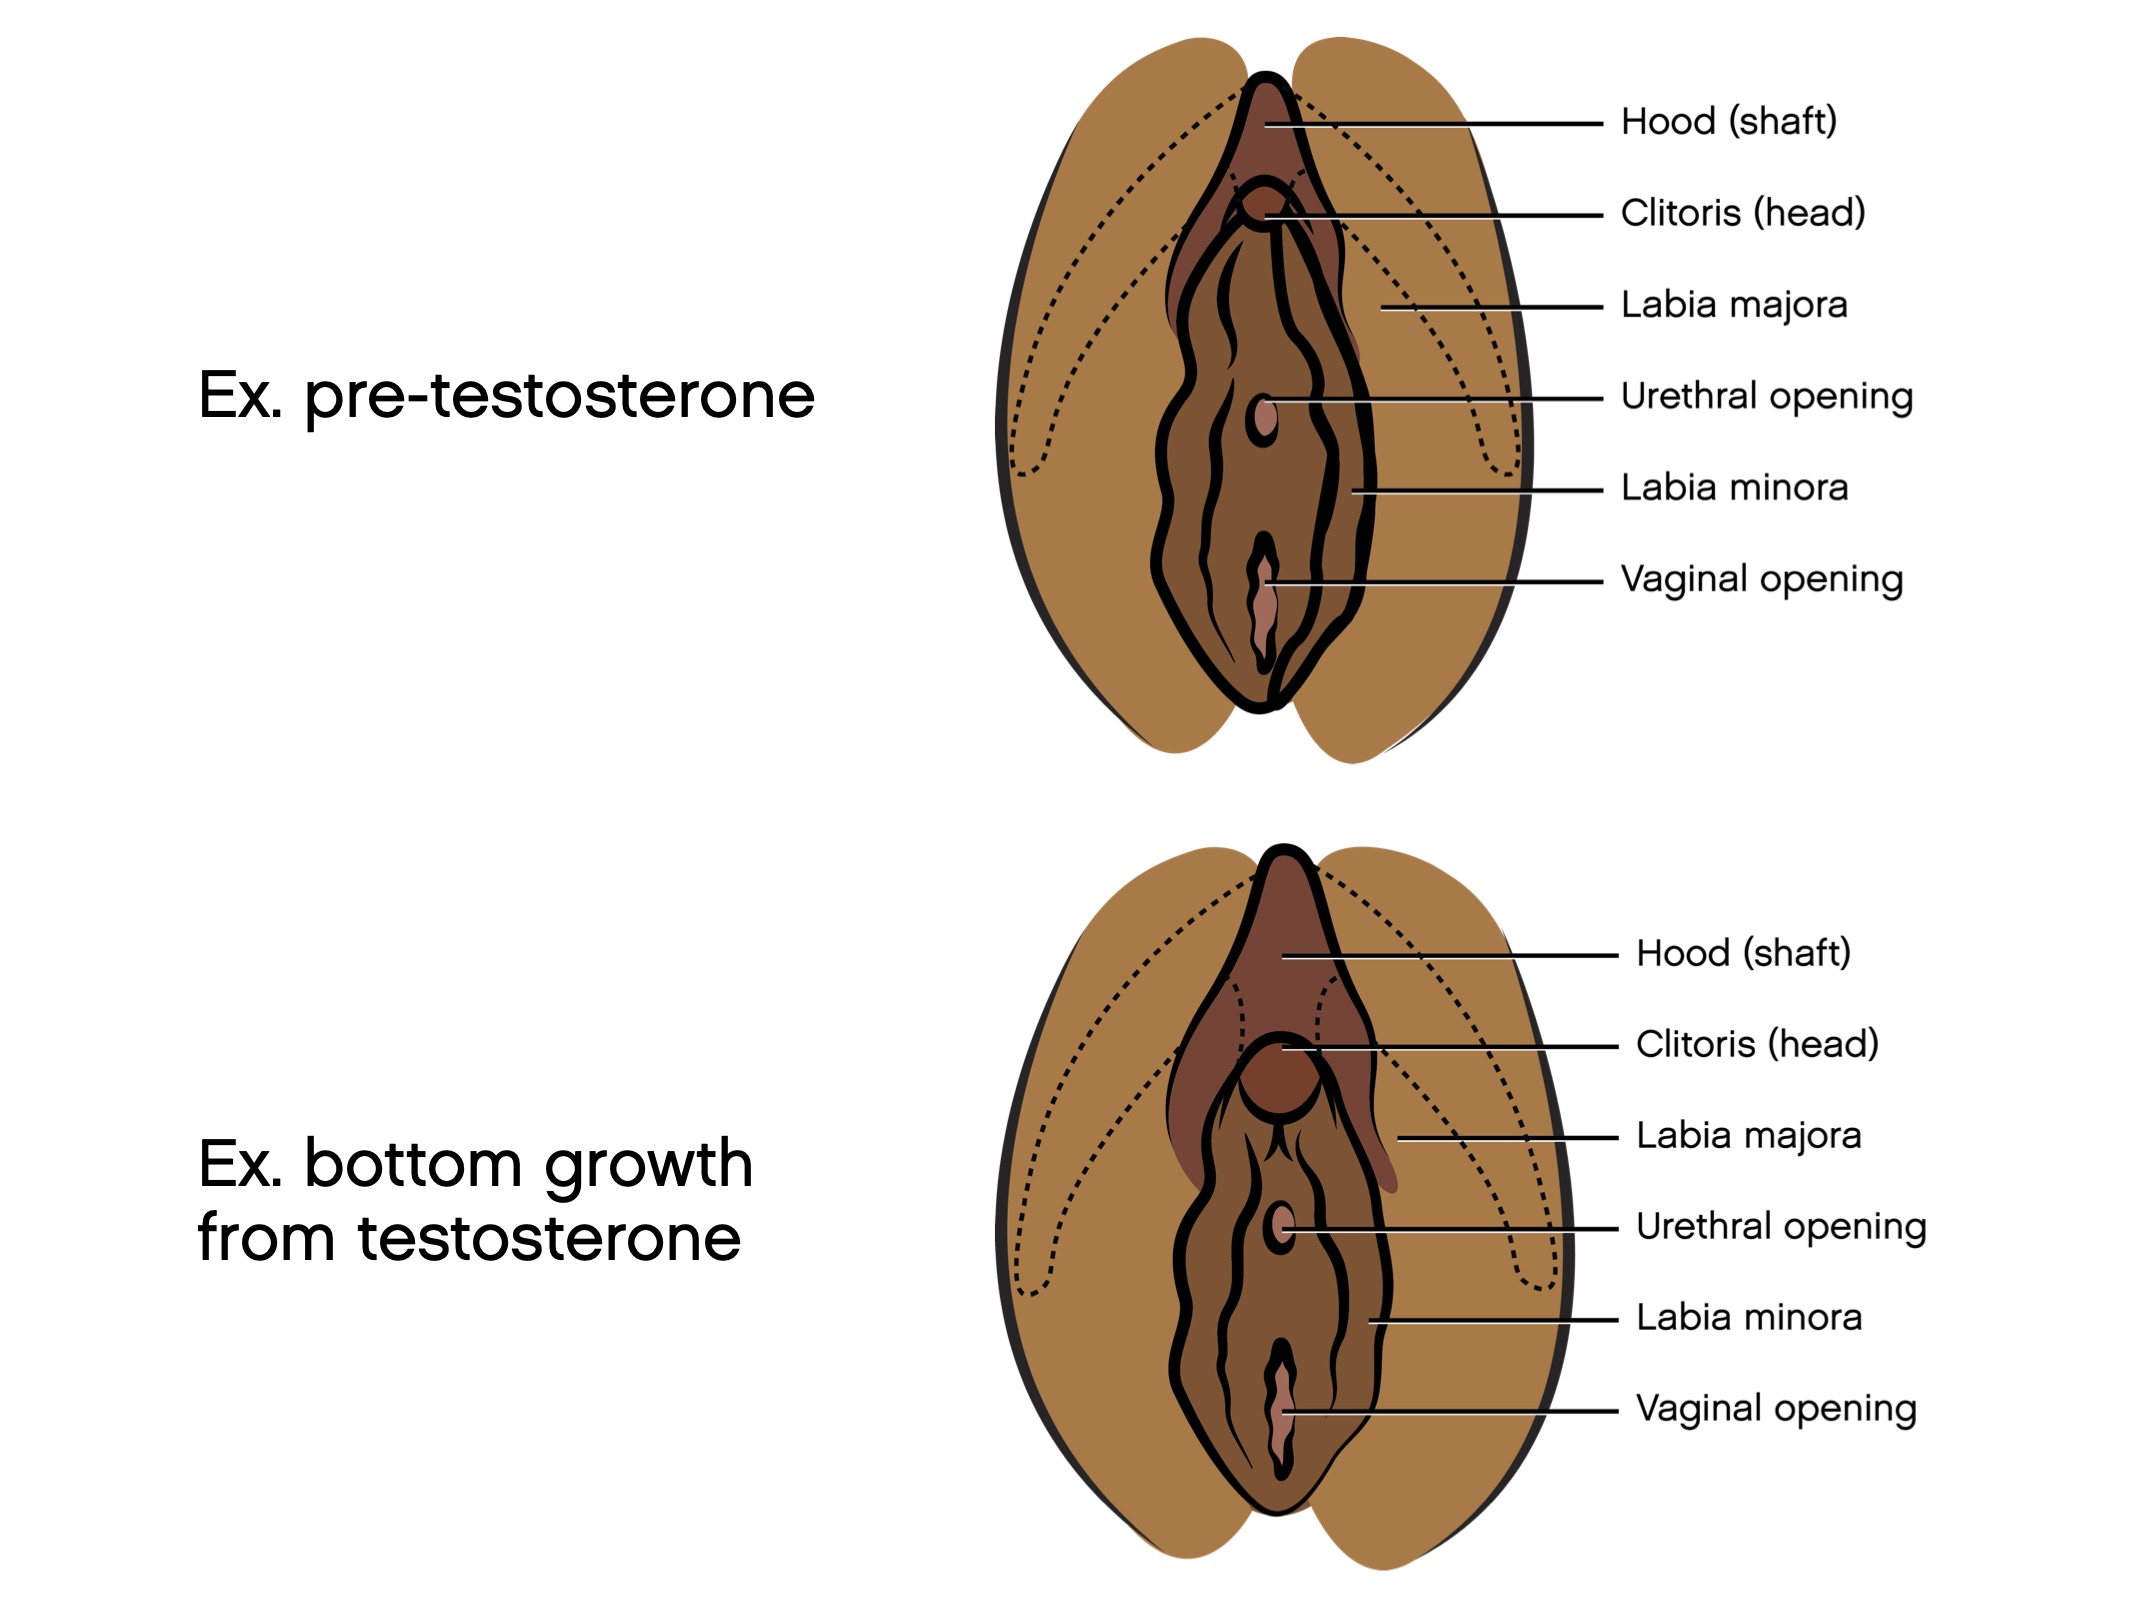 What does bottom growth on testosterone look like